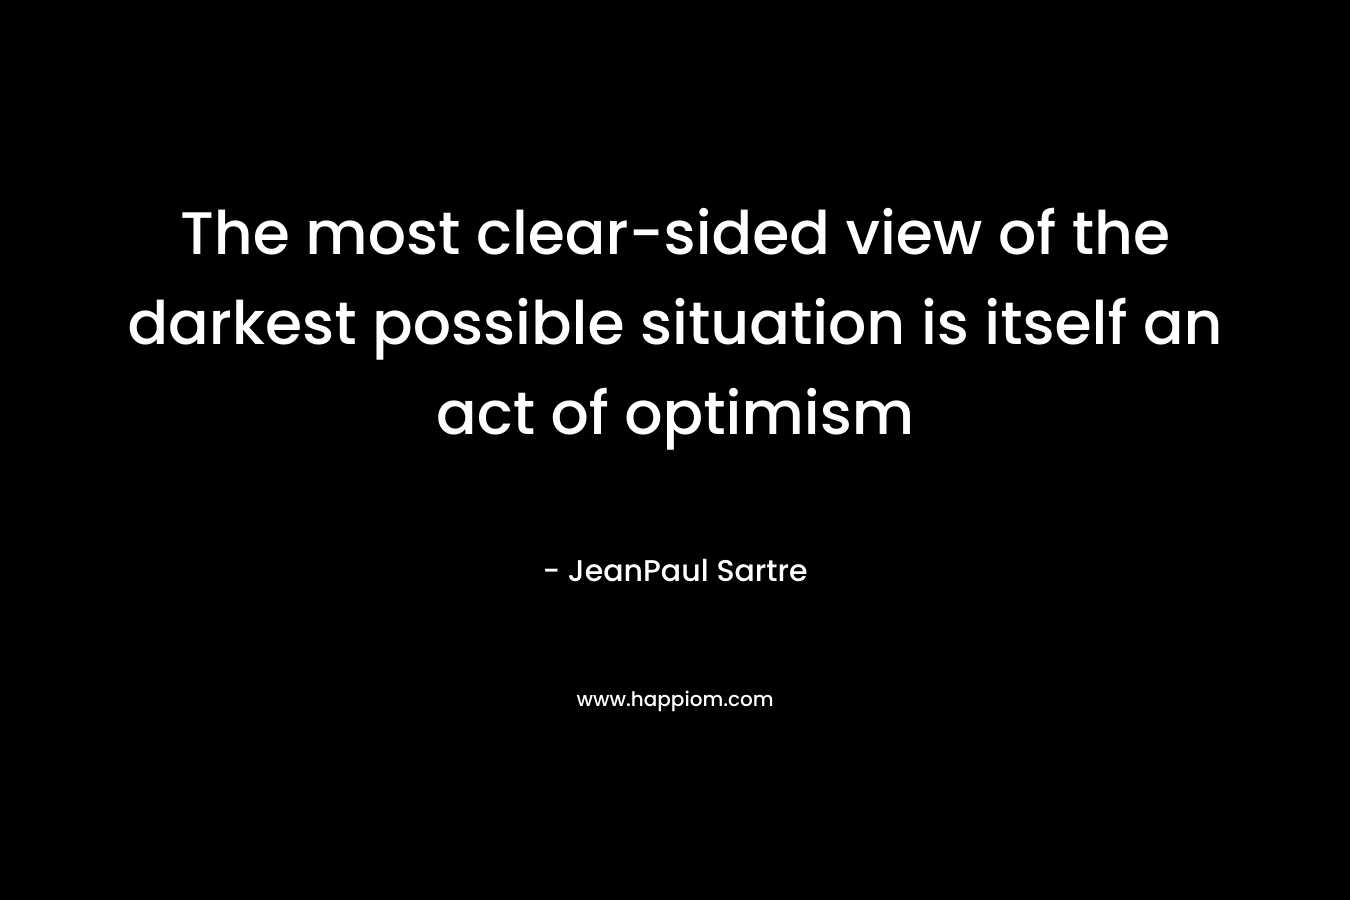 The most clear-sided view of the darkest possible situation is itself an act of optimism – JeanPaul Sartre